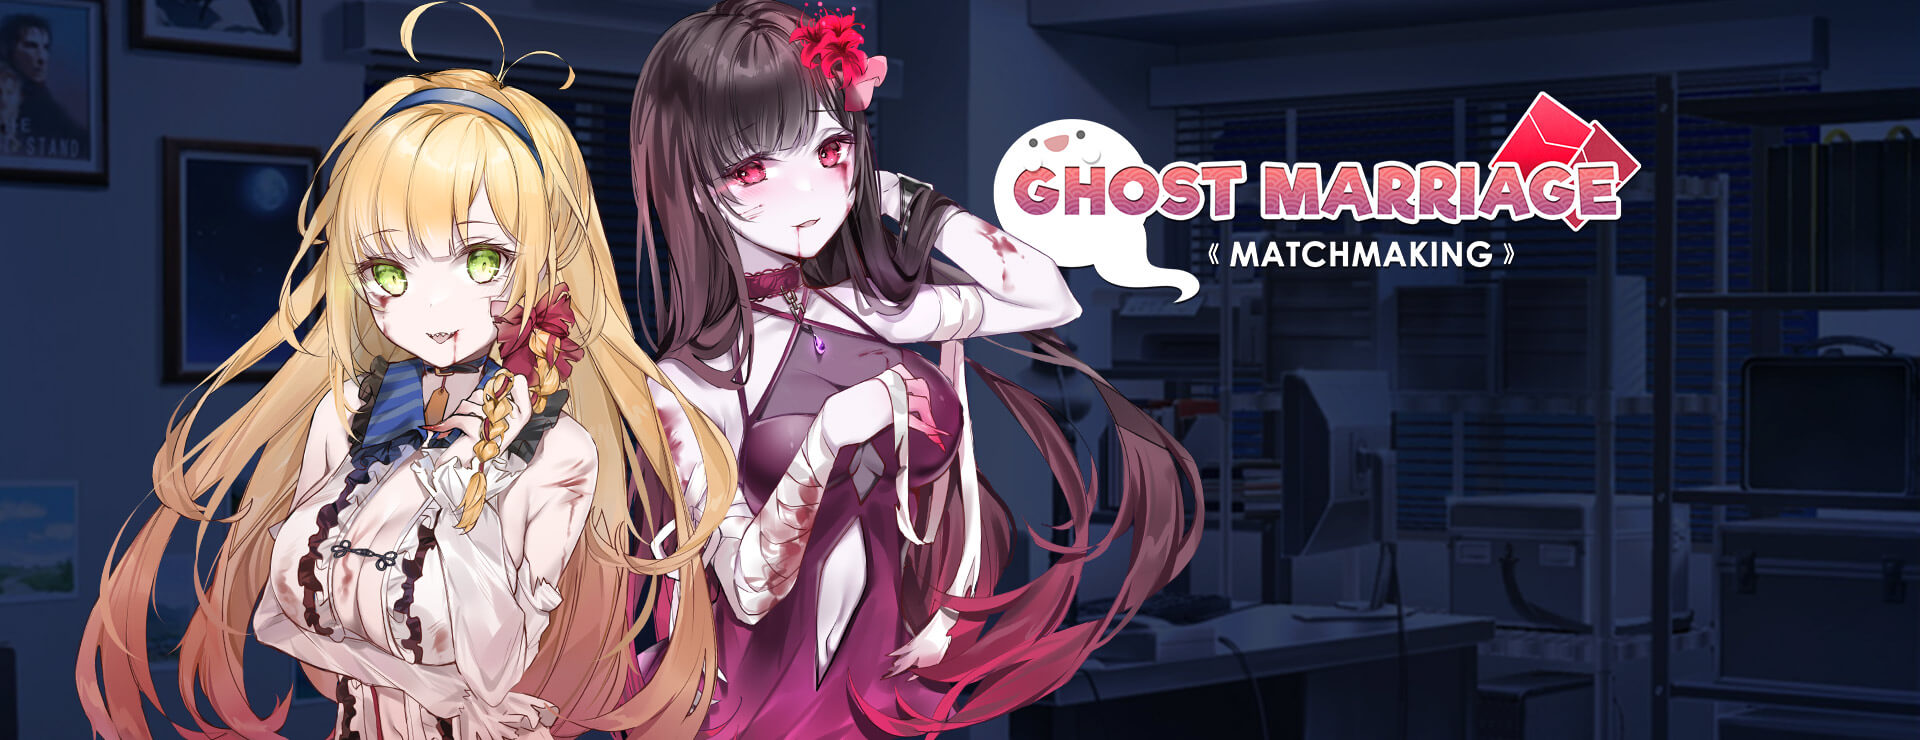 Ghost Marriage Matchmaking - RPG Gra